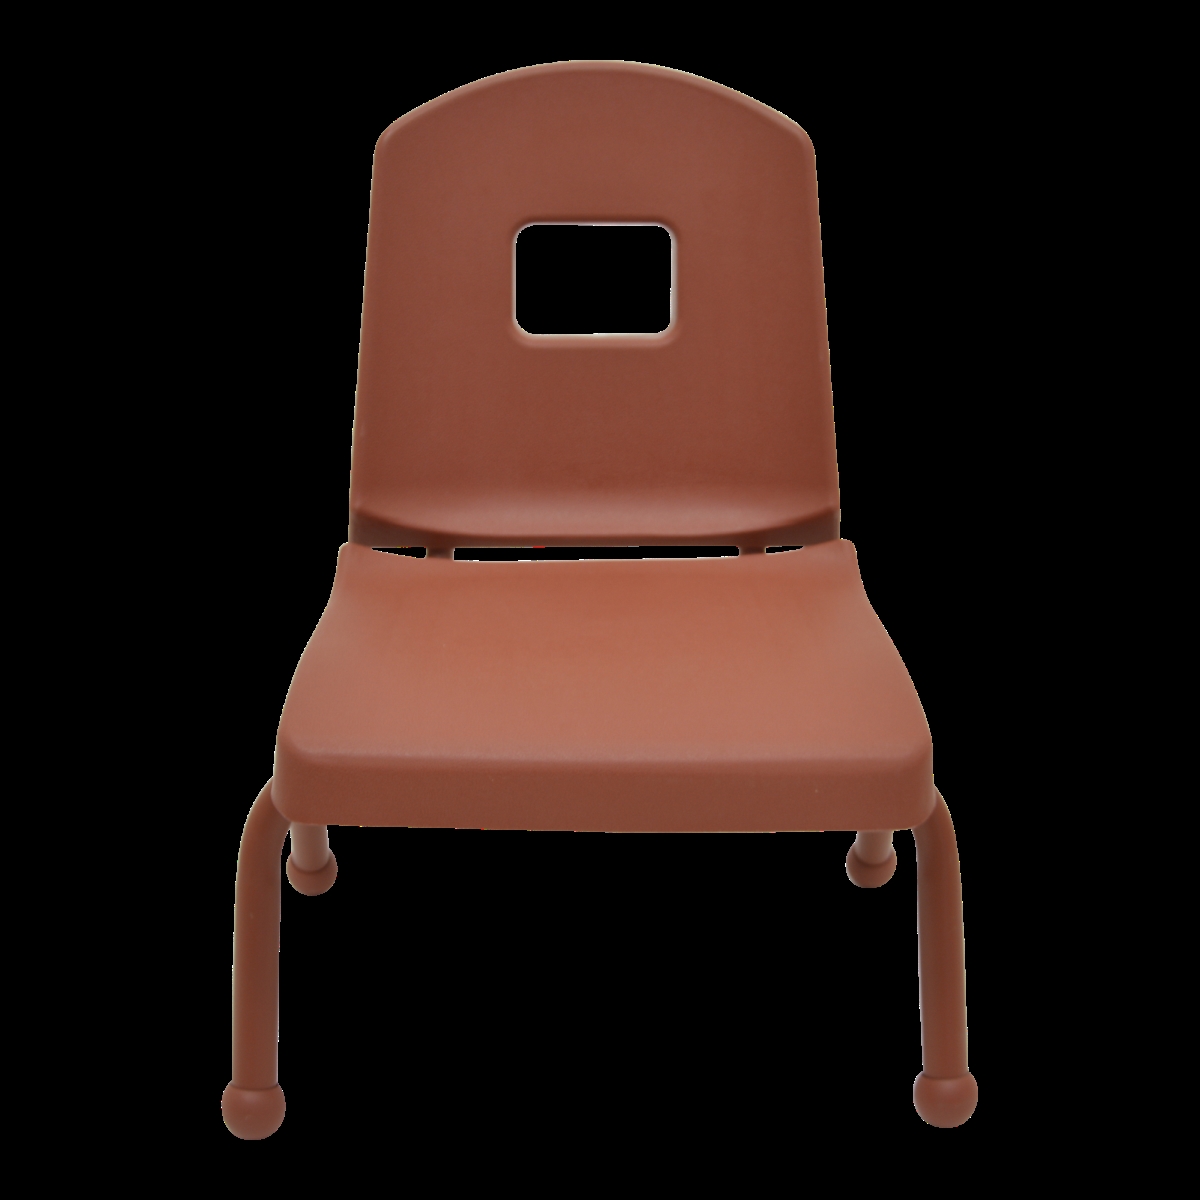 10chrb-rt-5pk 10 In. Creative Color Split Bucket Chair With Matching Ball Glide In Rust - Pack Of 5